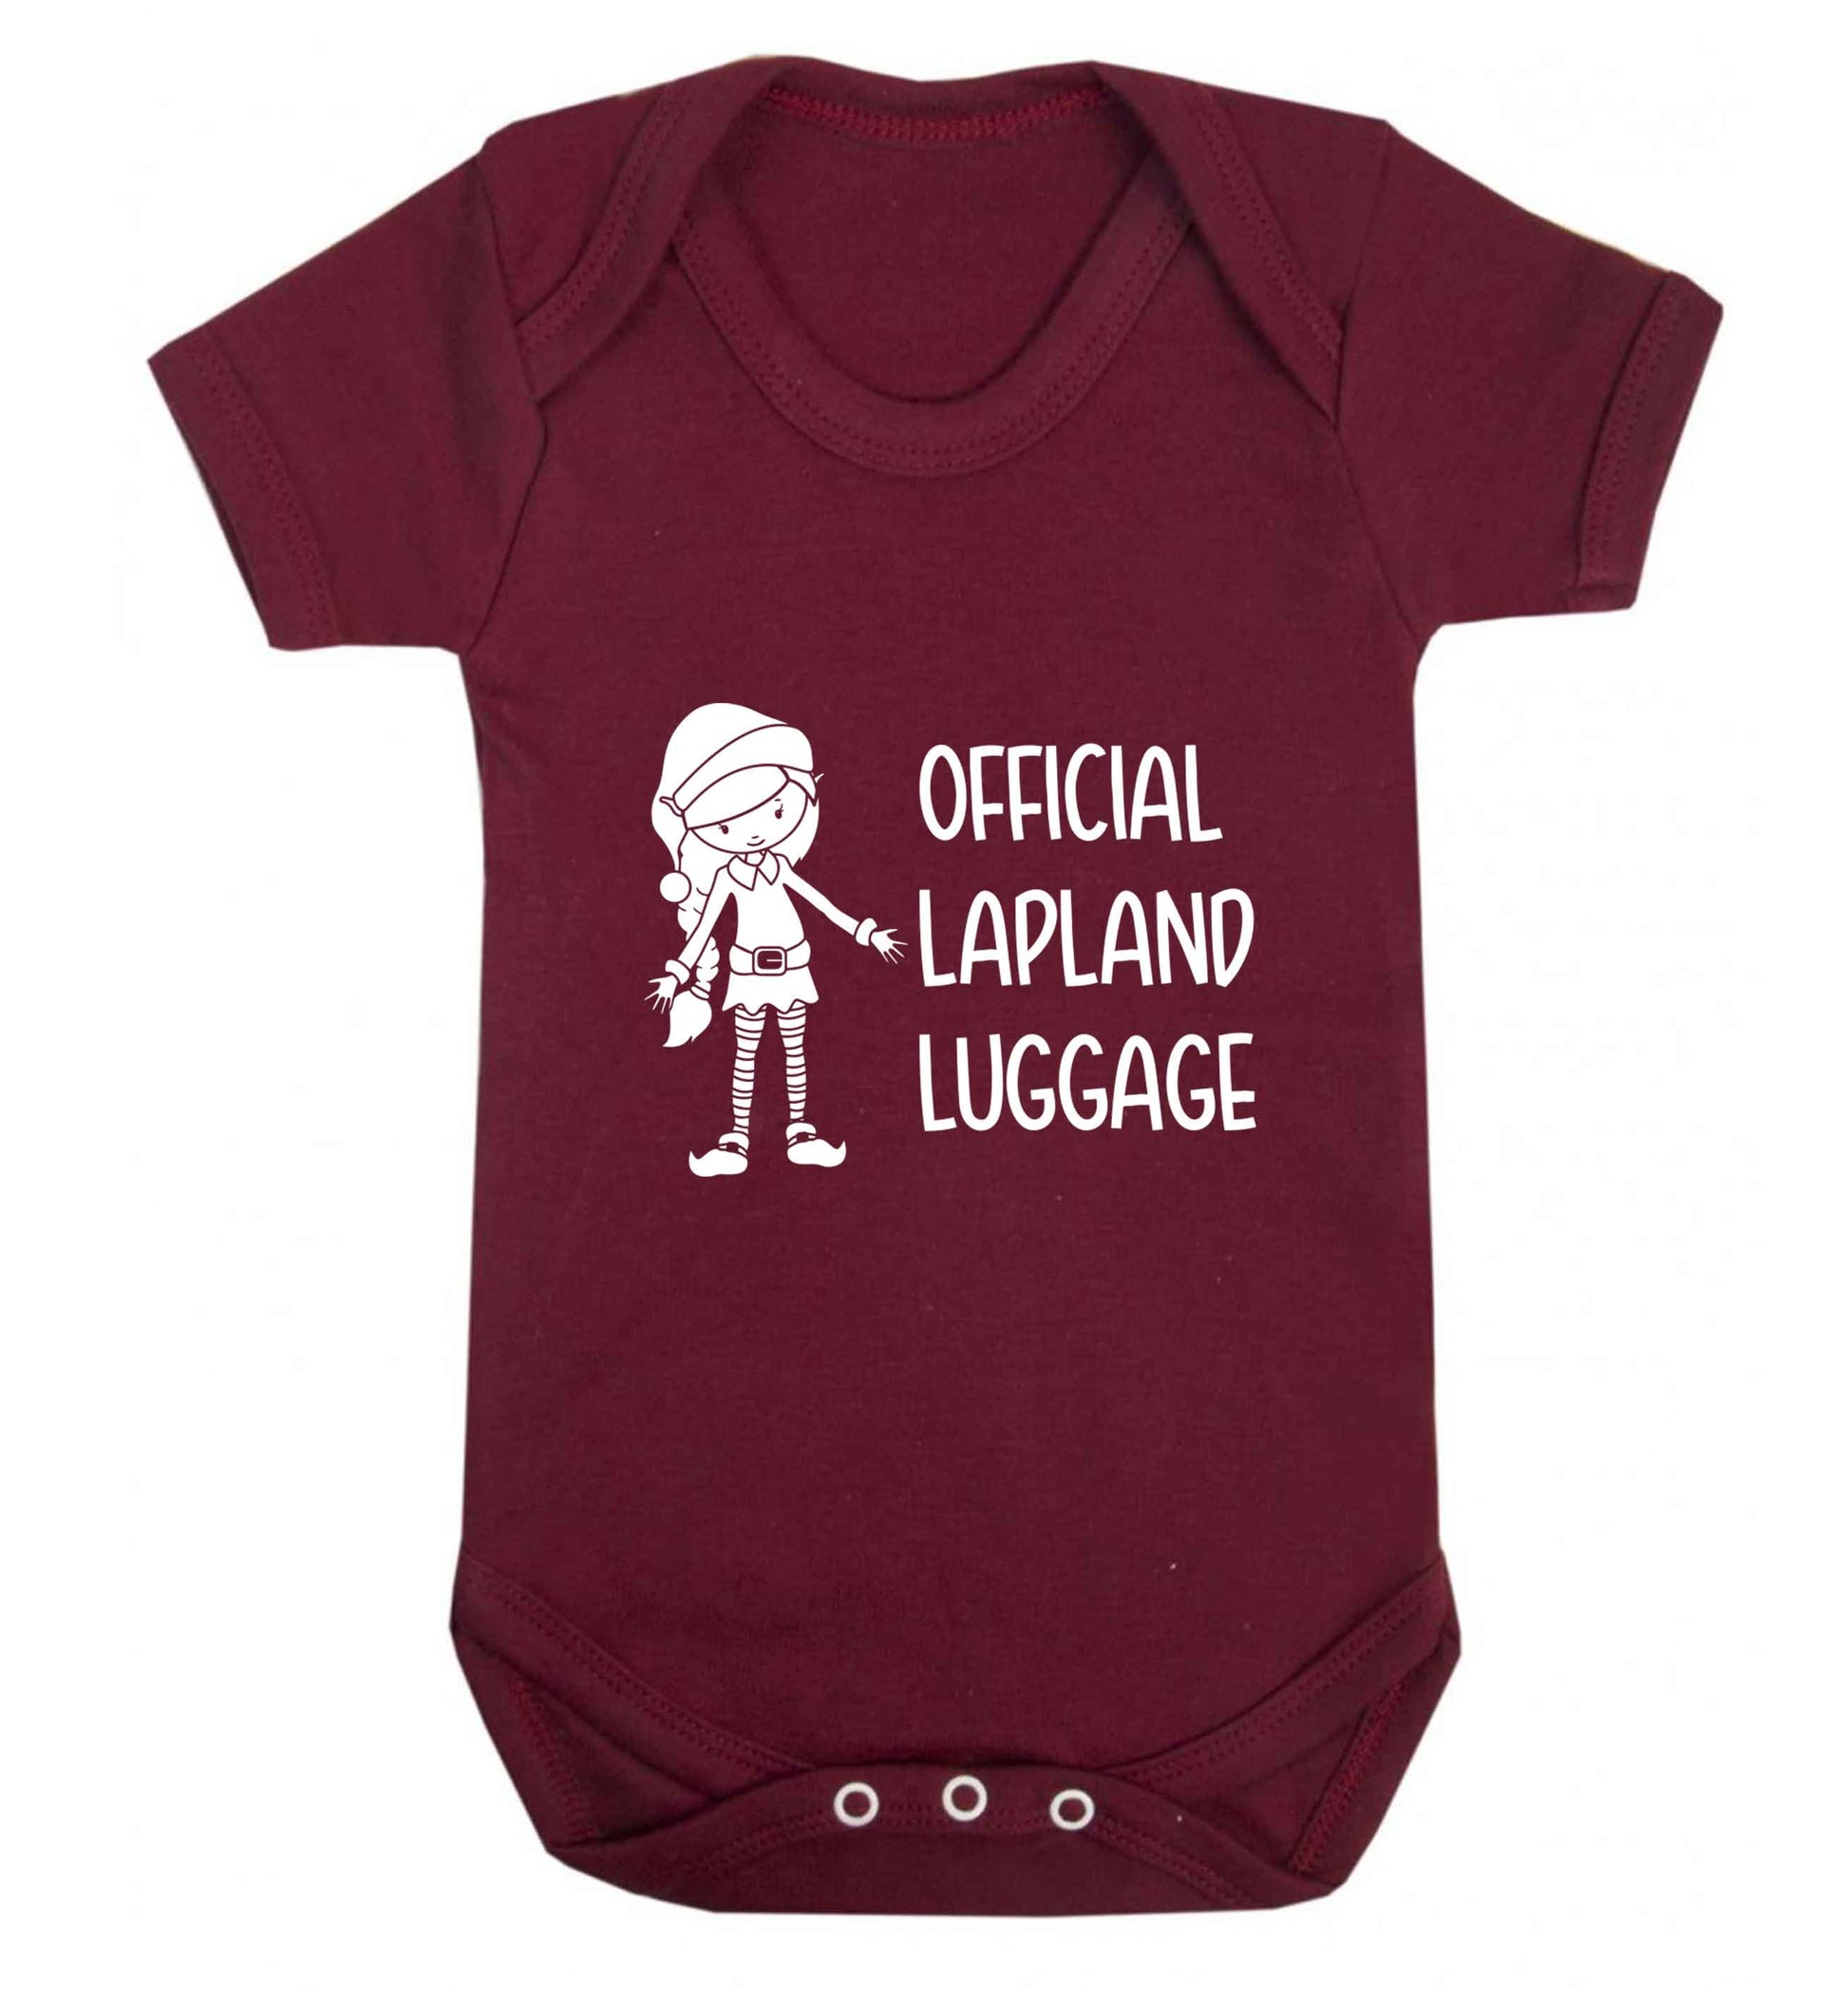 Official lapland luggage - Elf snowflake baby vest maroon 18-24 months